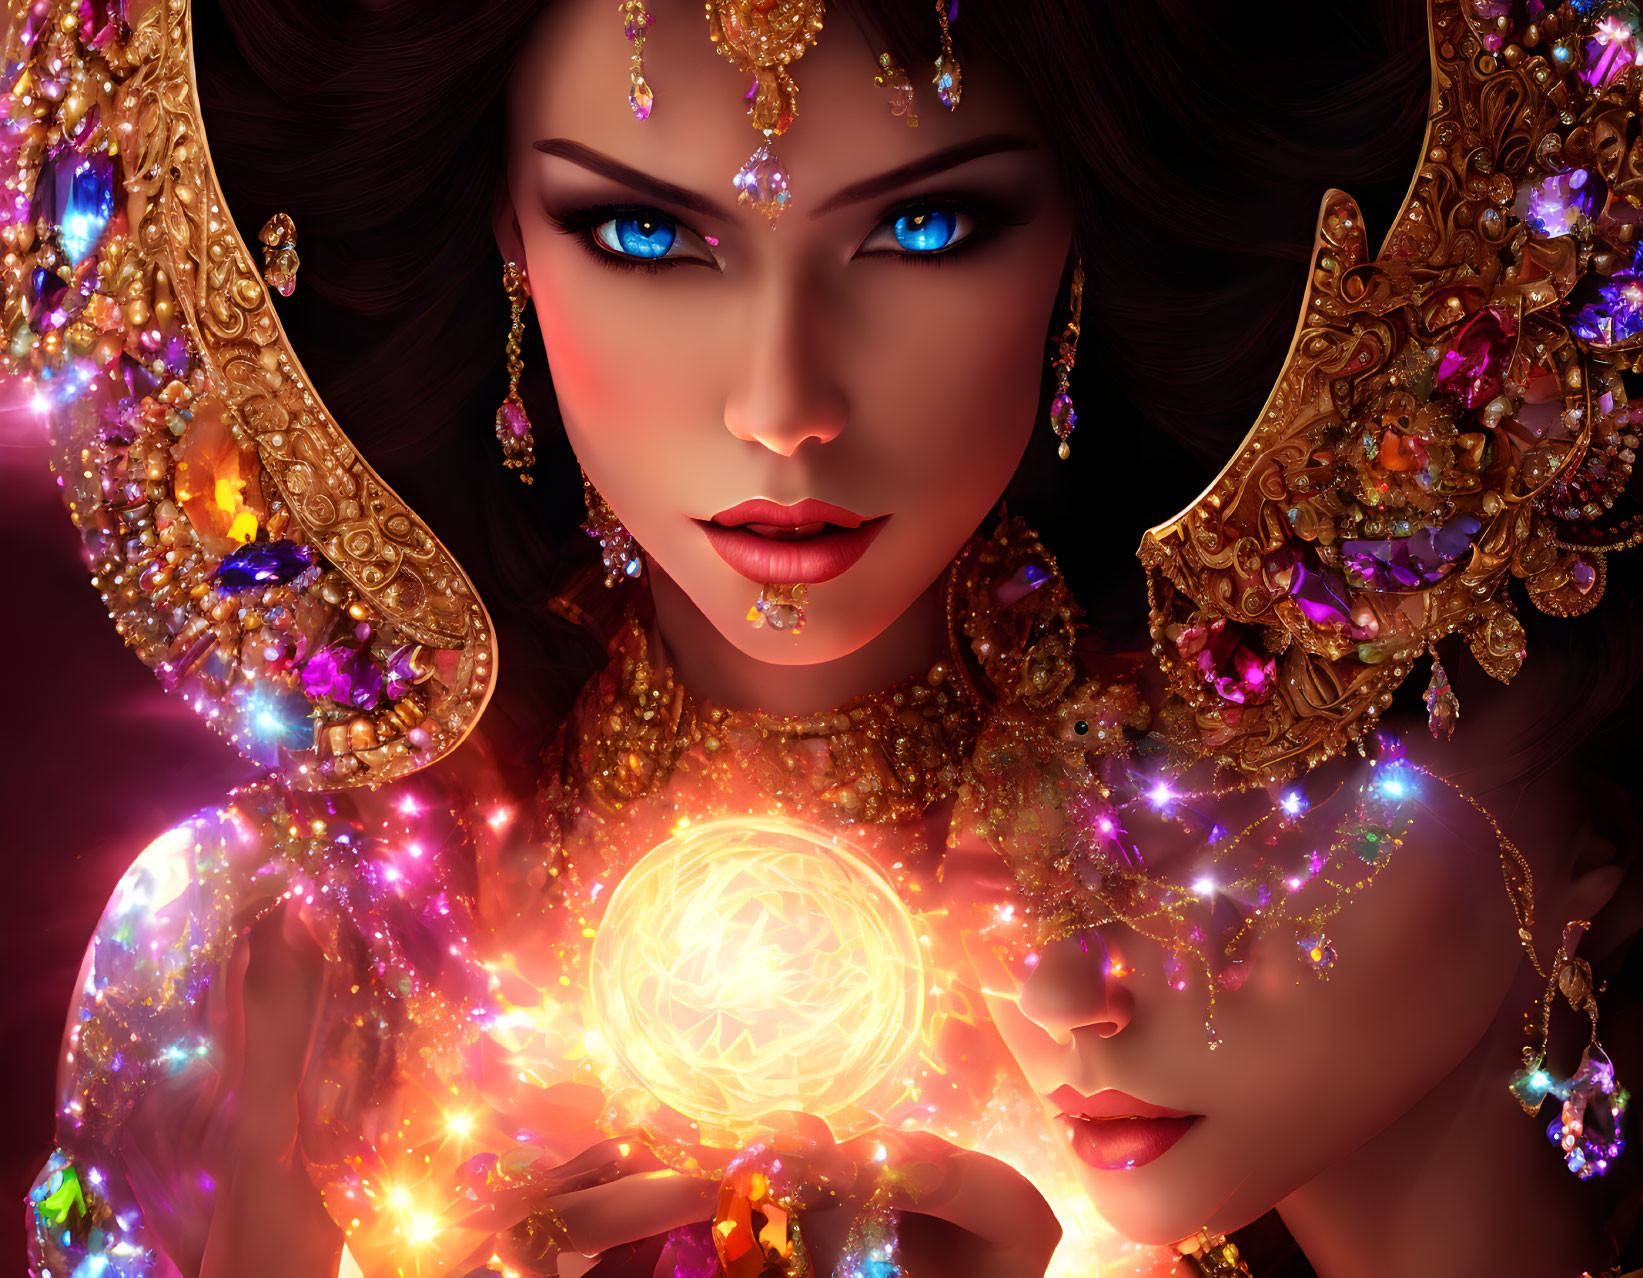 Close-up of mystical female figure with glowing blue eyes and ornate golden headpiece creating magical orb.